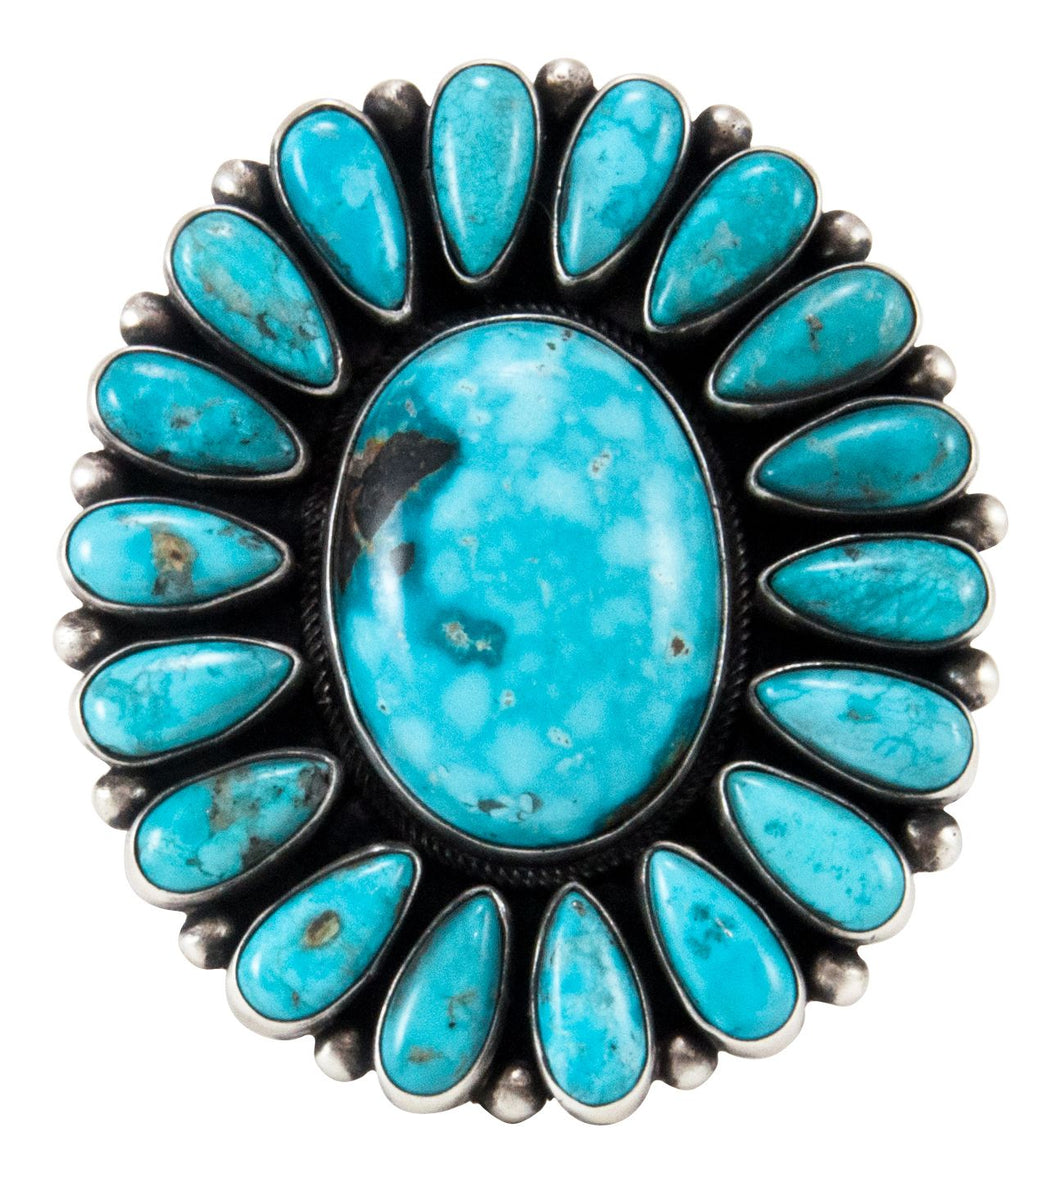 Navajo Native American Blue Moon Turquoise Cluster Ring Size 8 1/4